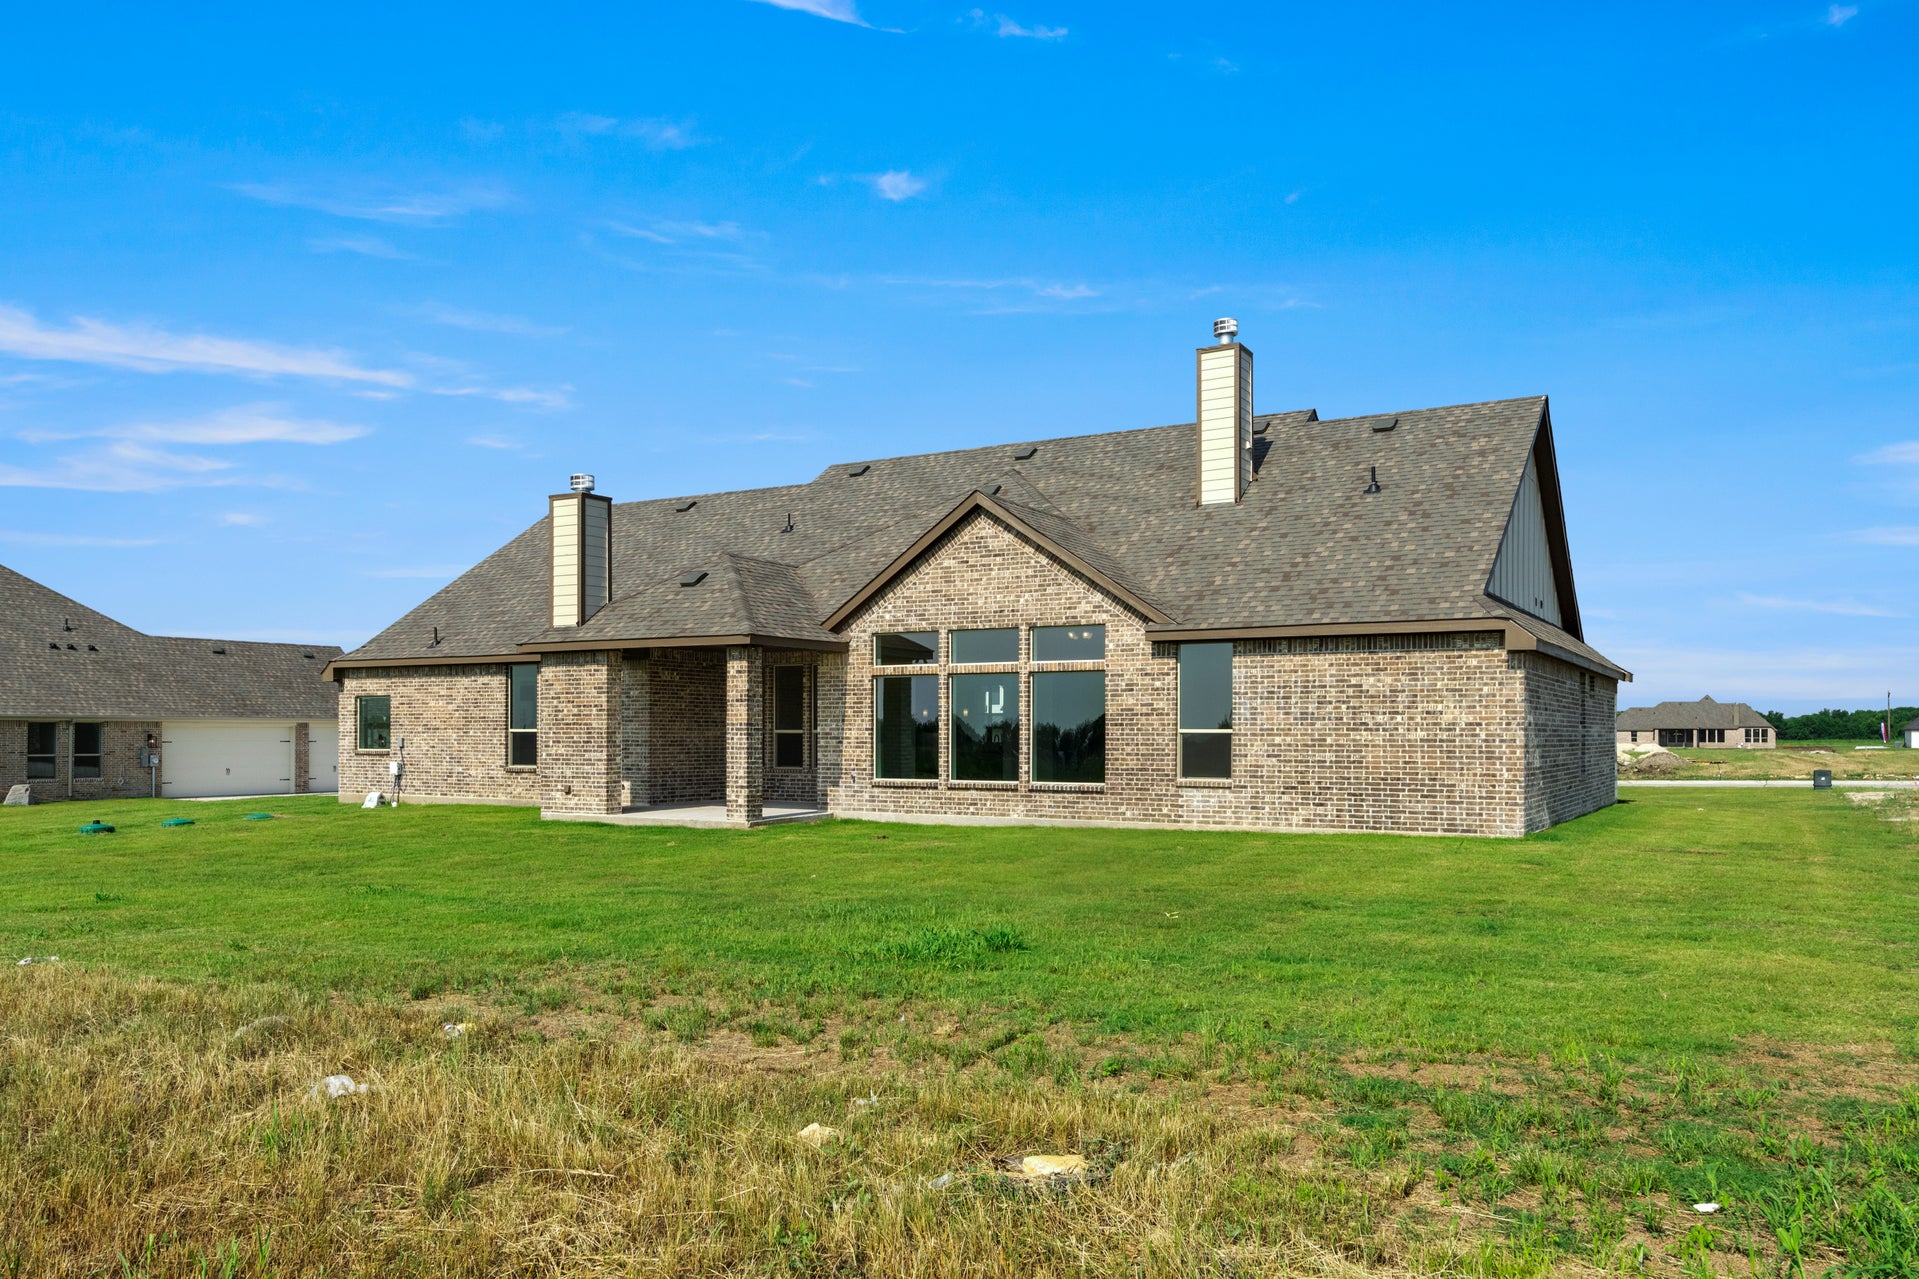 4br New Home in New Fairview, TX